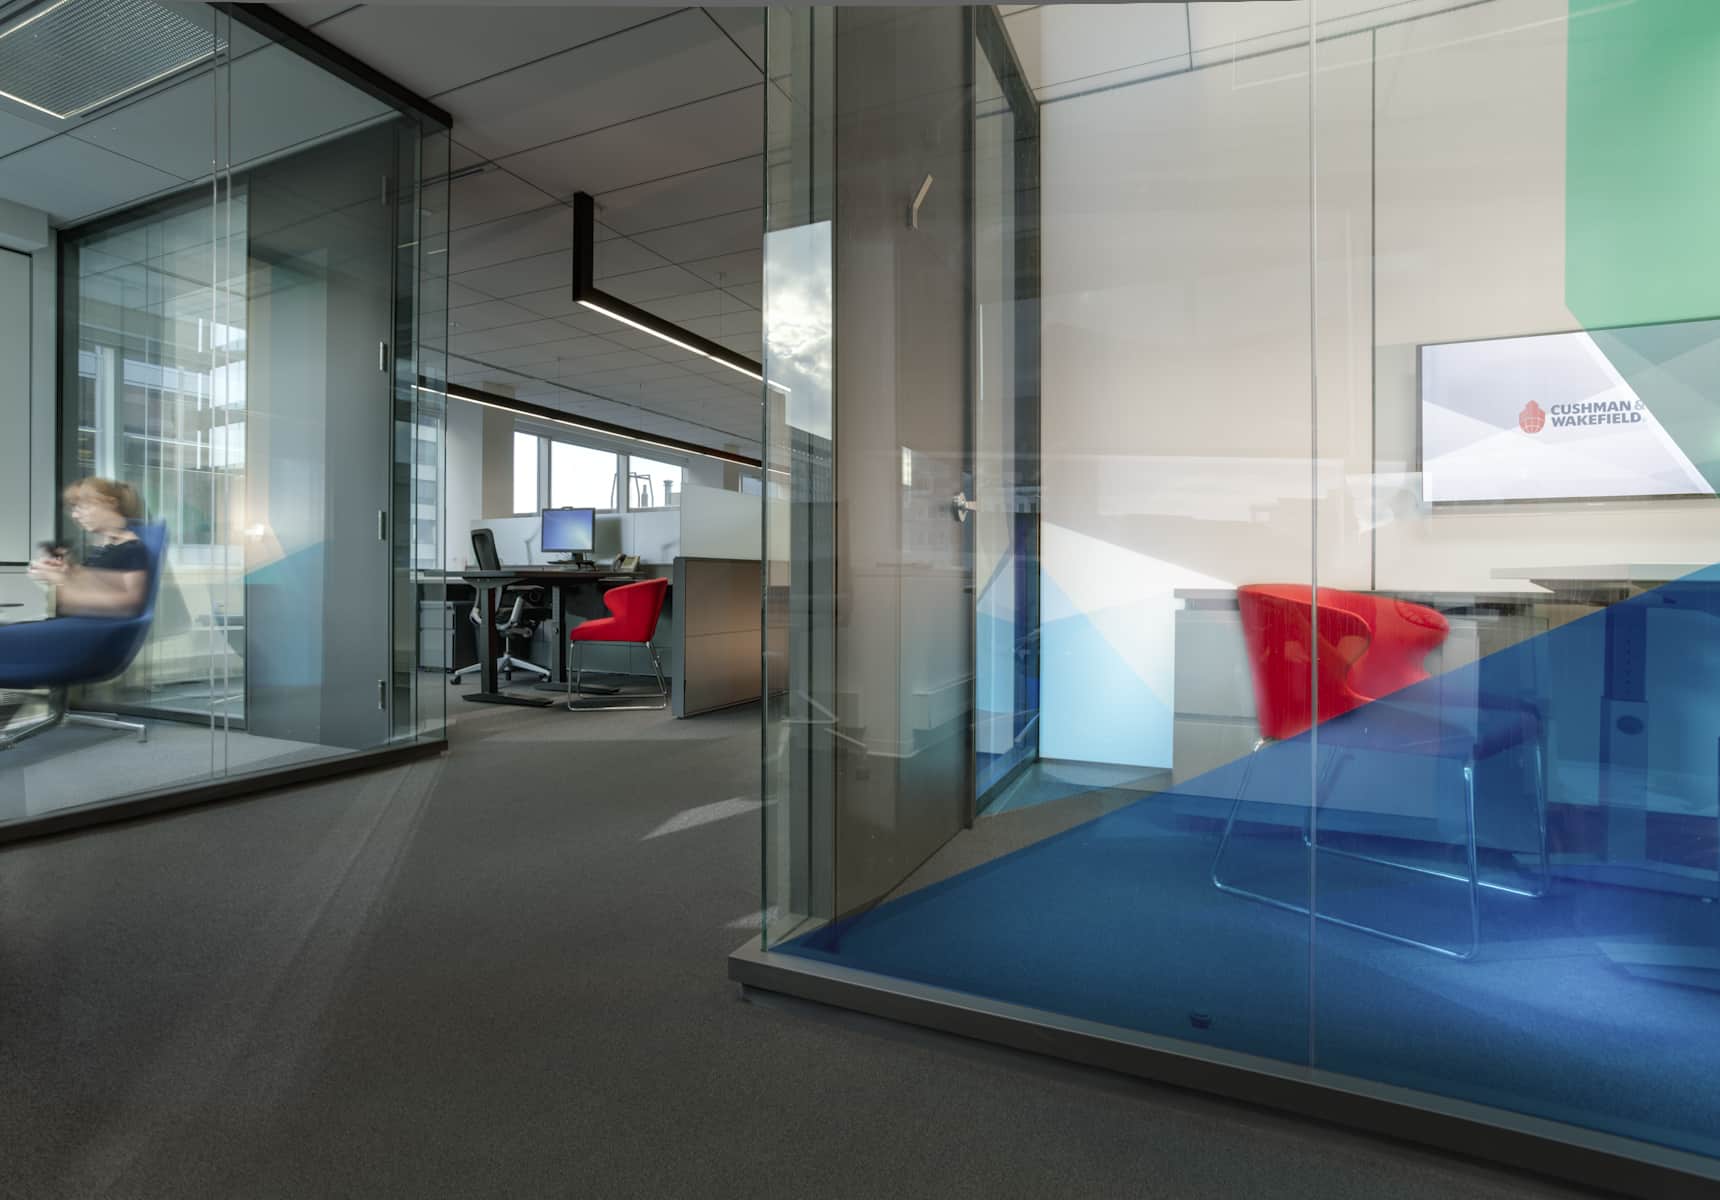 cushman-wakefield-offices-lemay-architecture-asd